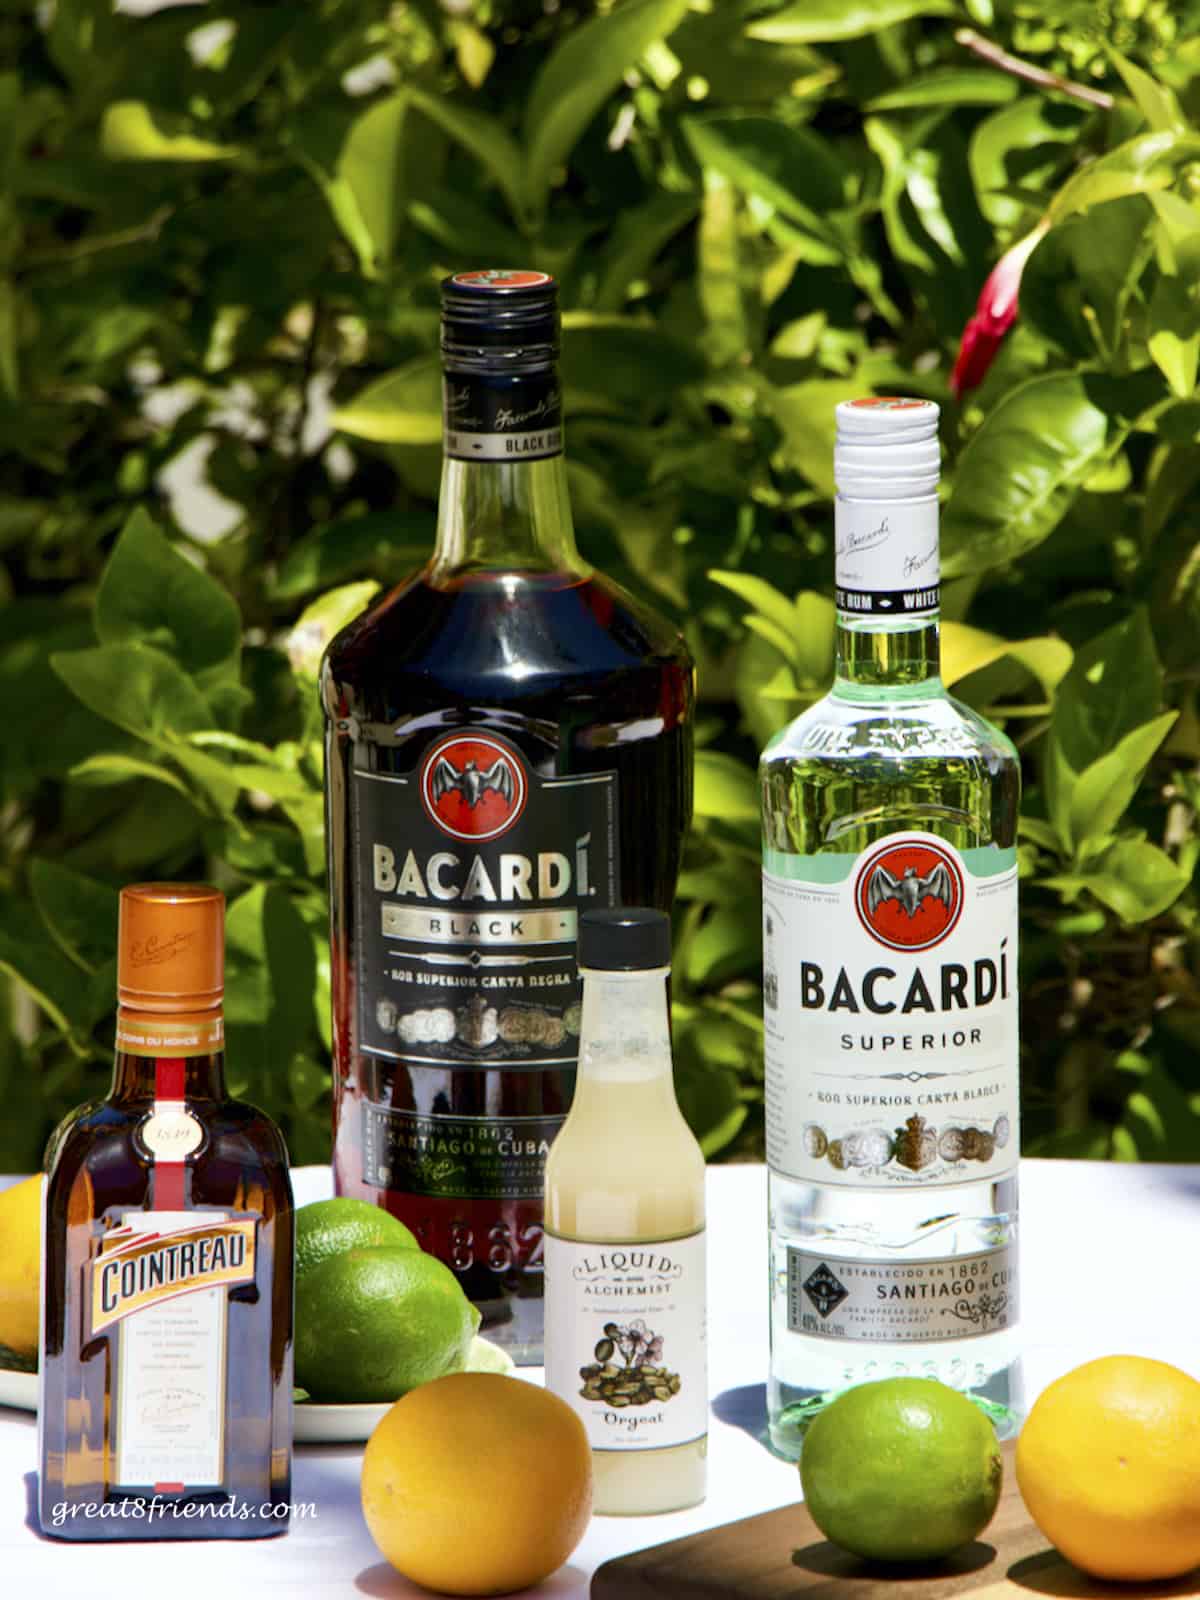 A bottle of Cointreau, Bacardi Black Rum, Orgeat and Bacardi silve rum against a backdrop of plants with some limes and oranges.